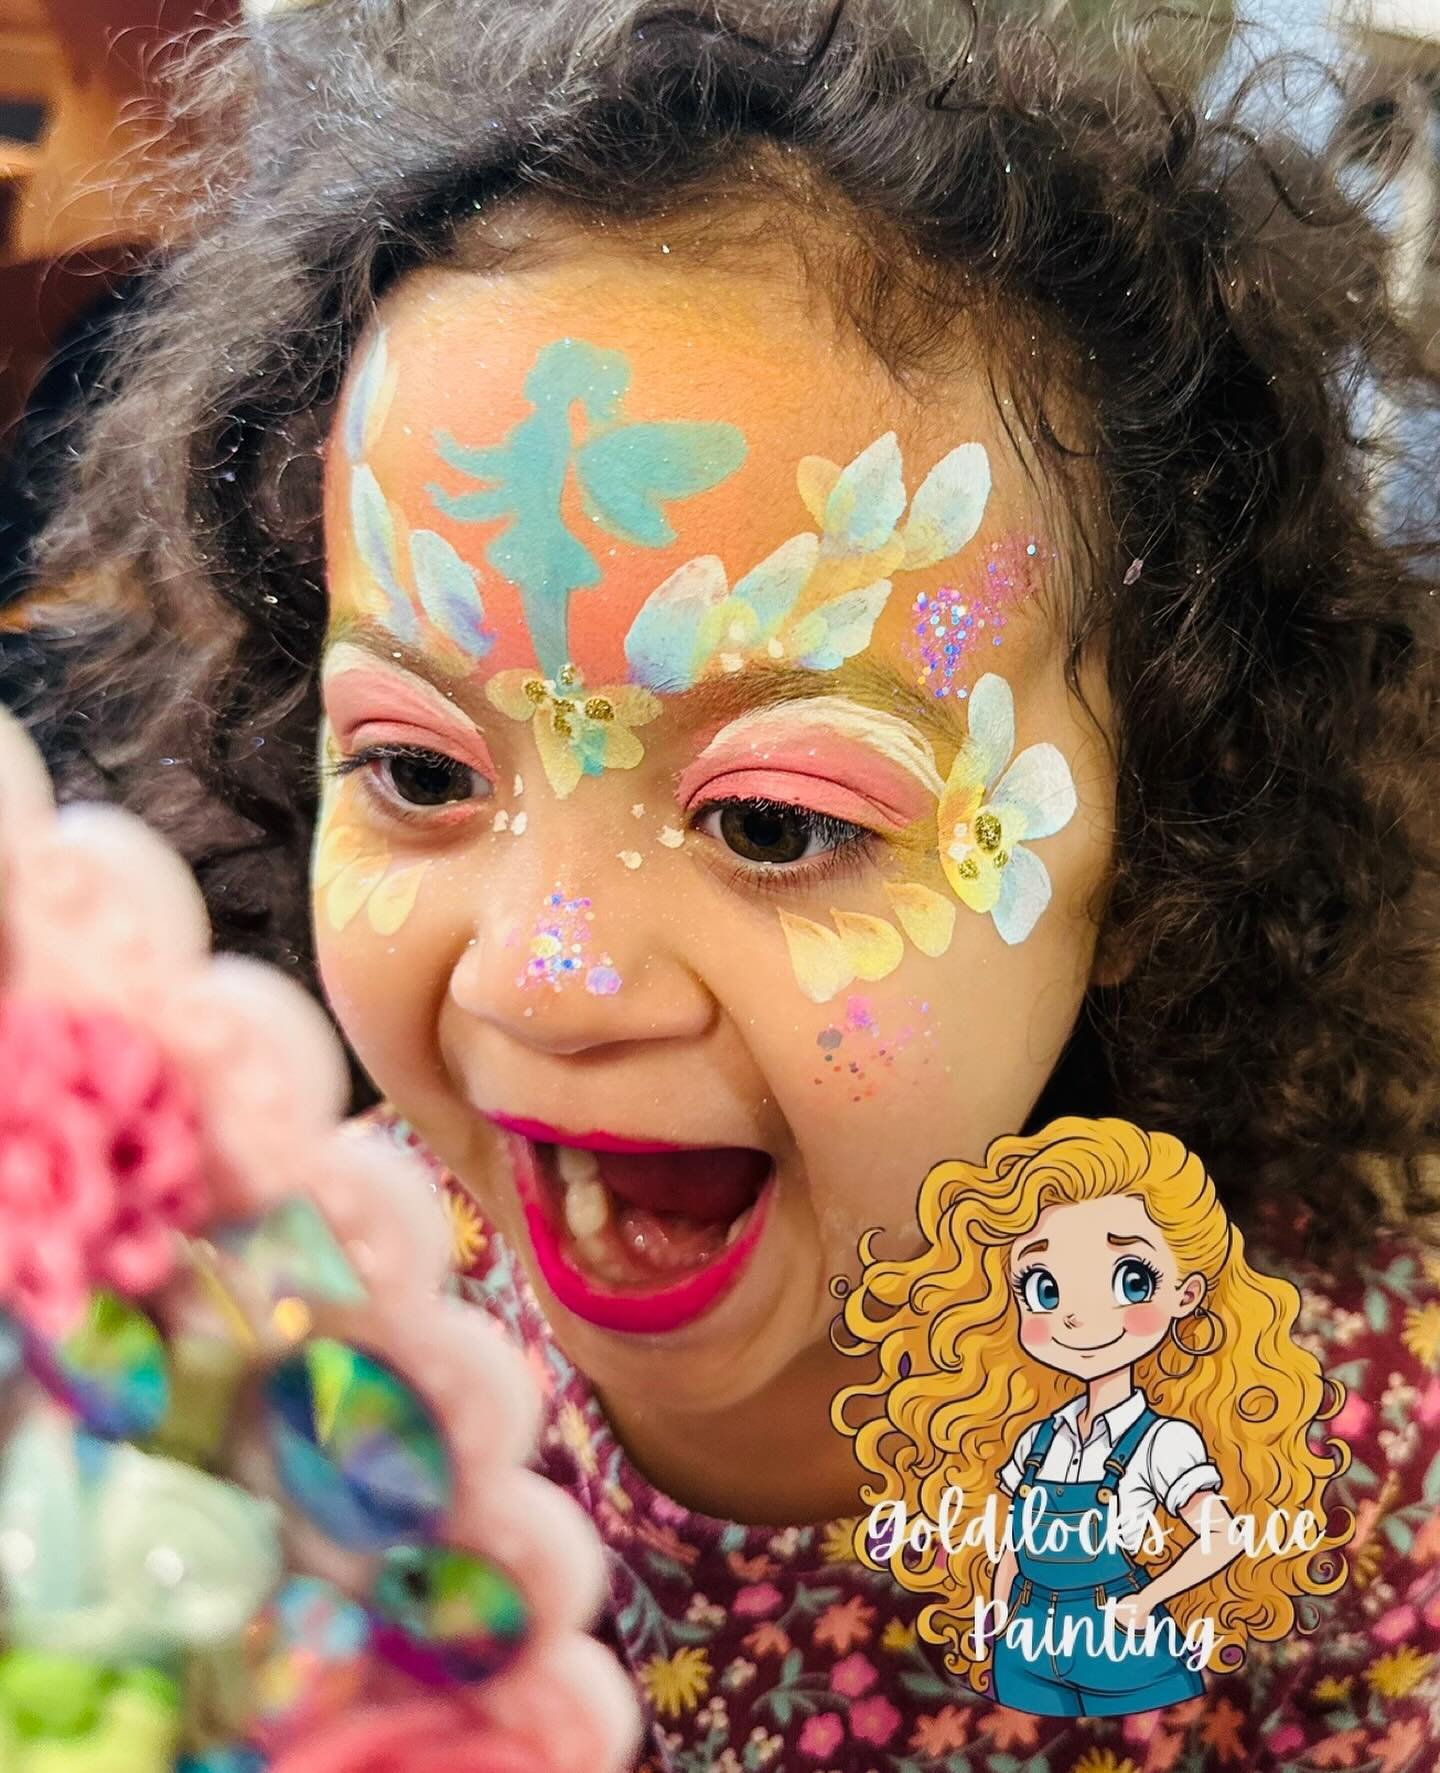 I had a lot of fun painting this fellow face painter&rsquo;s daughter today! 🧚 Thank goodness she liked it! #fairyfacepaint #fairyfacepainting #goldilocksfacepaints #magiccityfacepainters #birminghamfacepainter